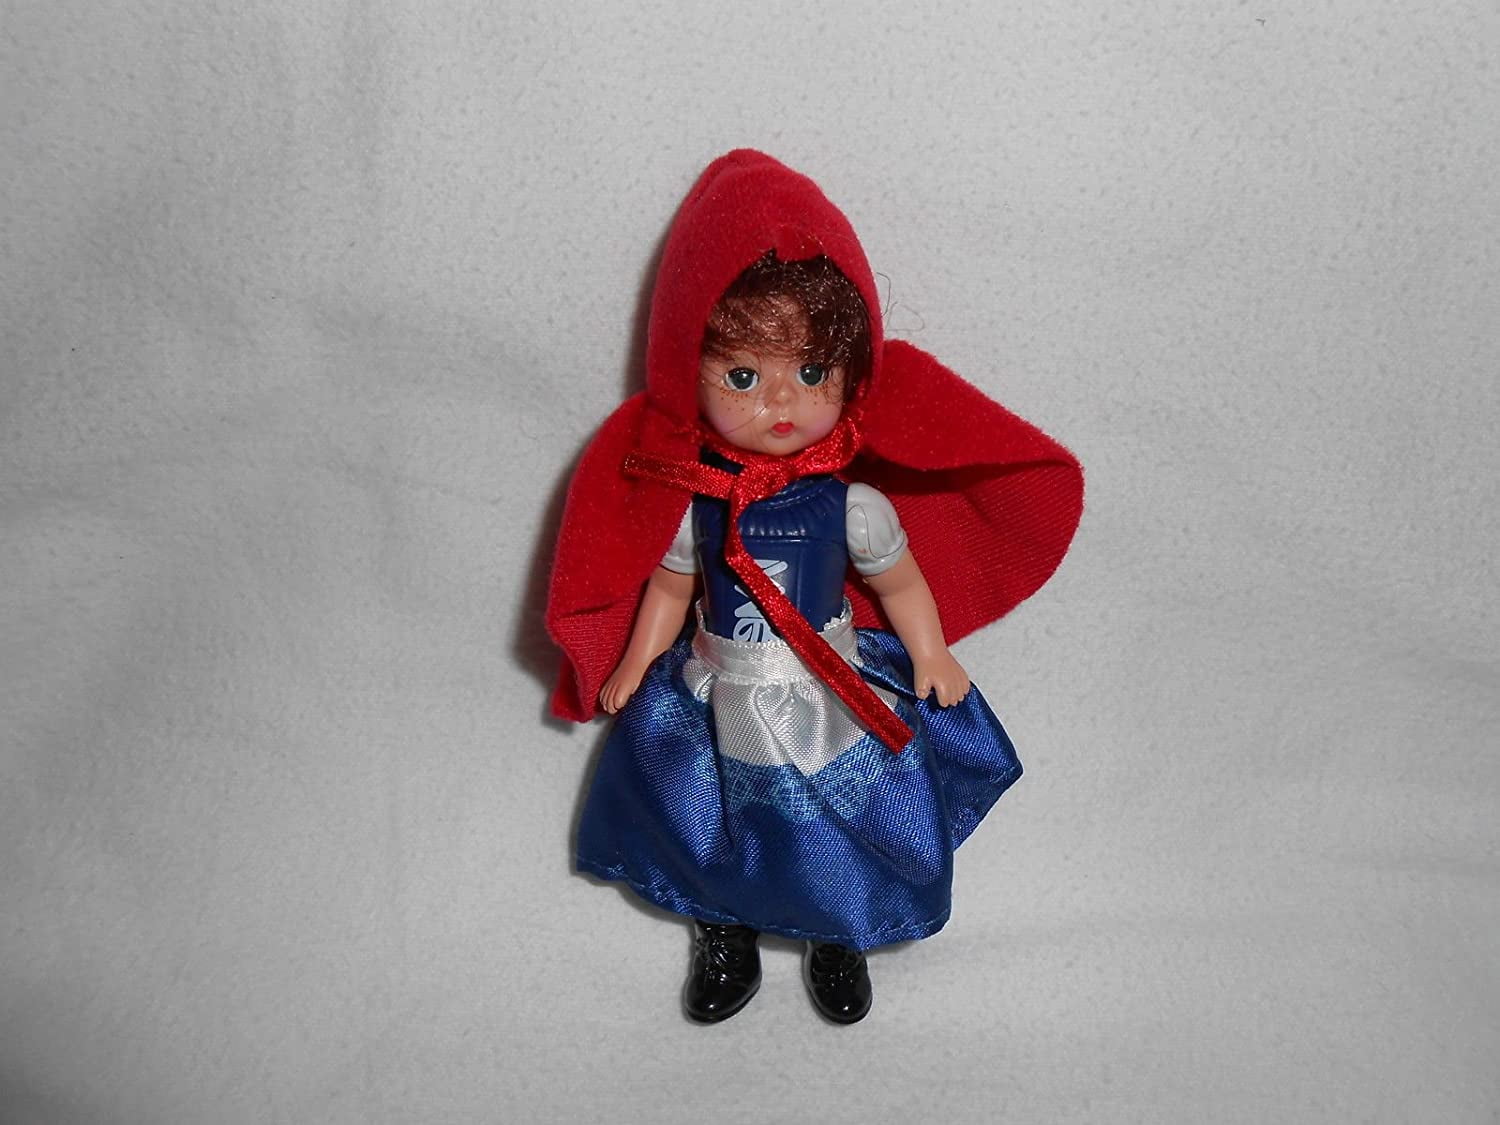 Details about   McDonalds Happy Meal Toy 2010 Madame Alexander Doll Little Red Riding Hood #7 